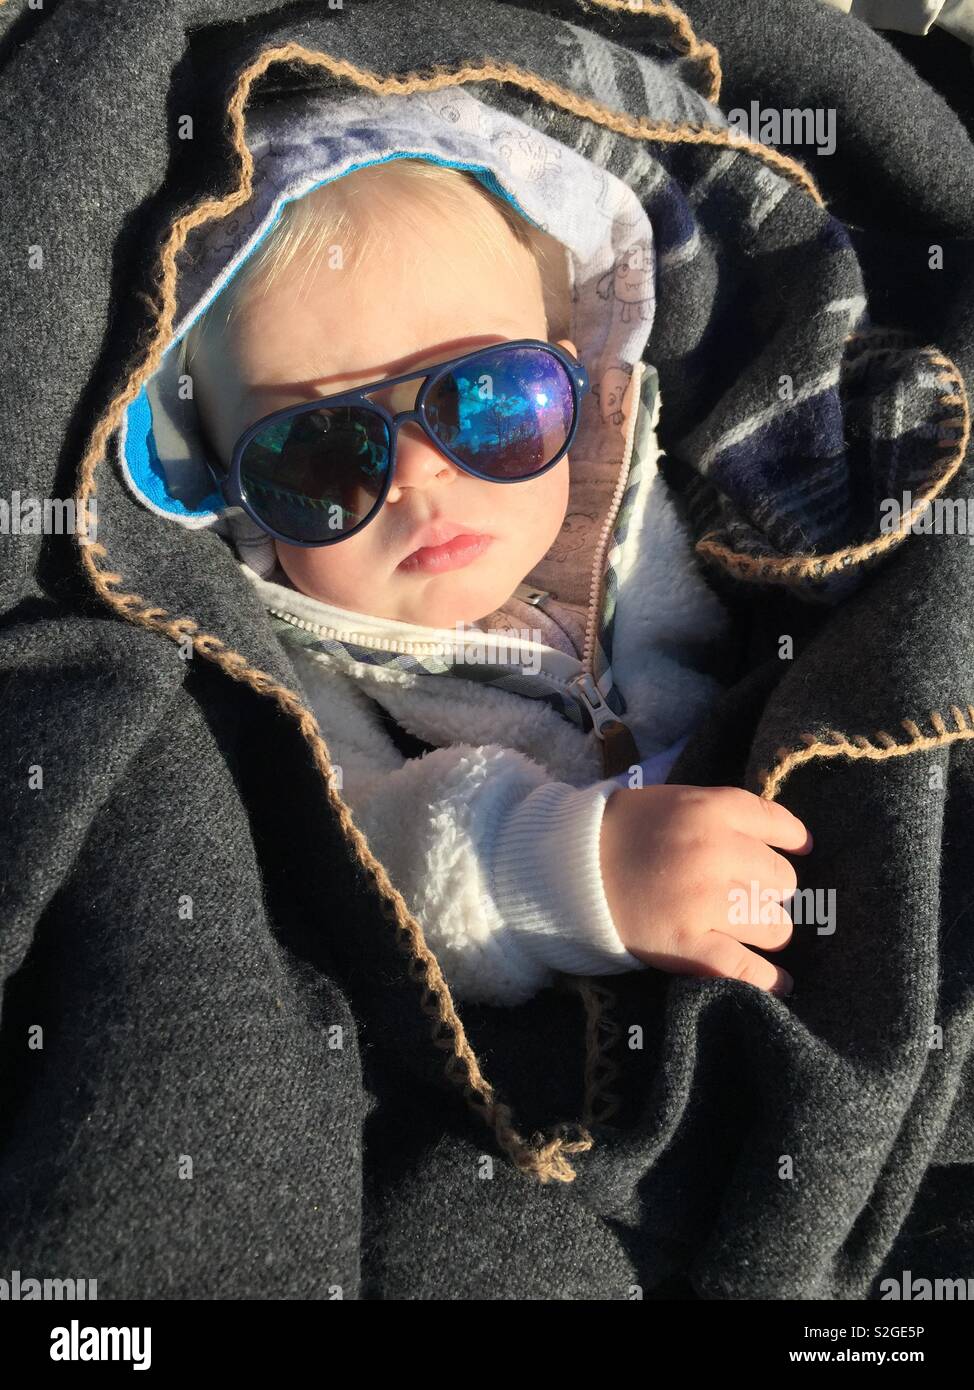 Cool baby in sunglasses Stock Photo - Alamy